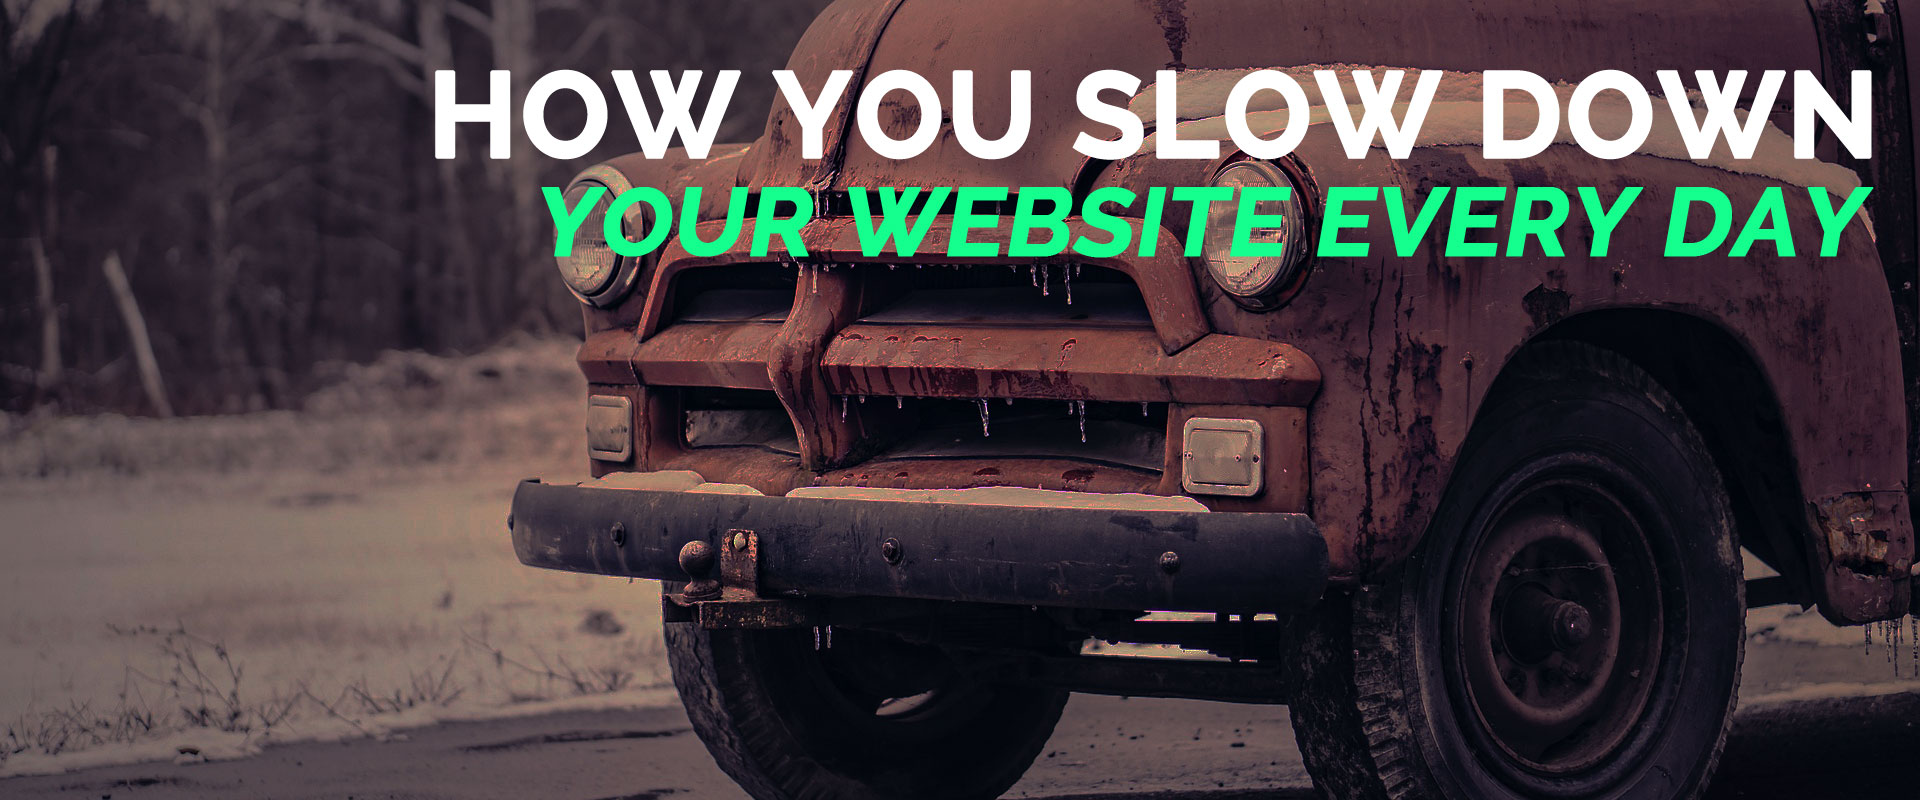 How you slow down your website